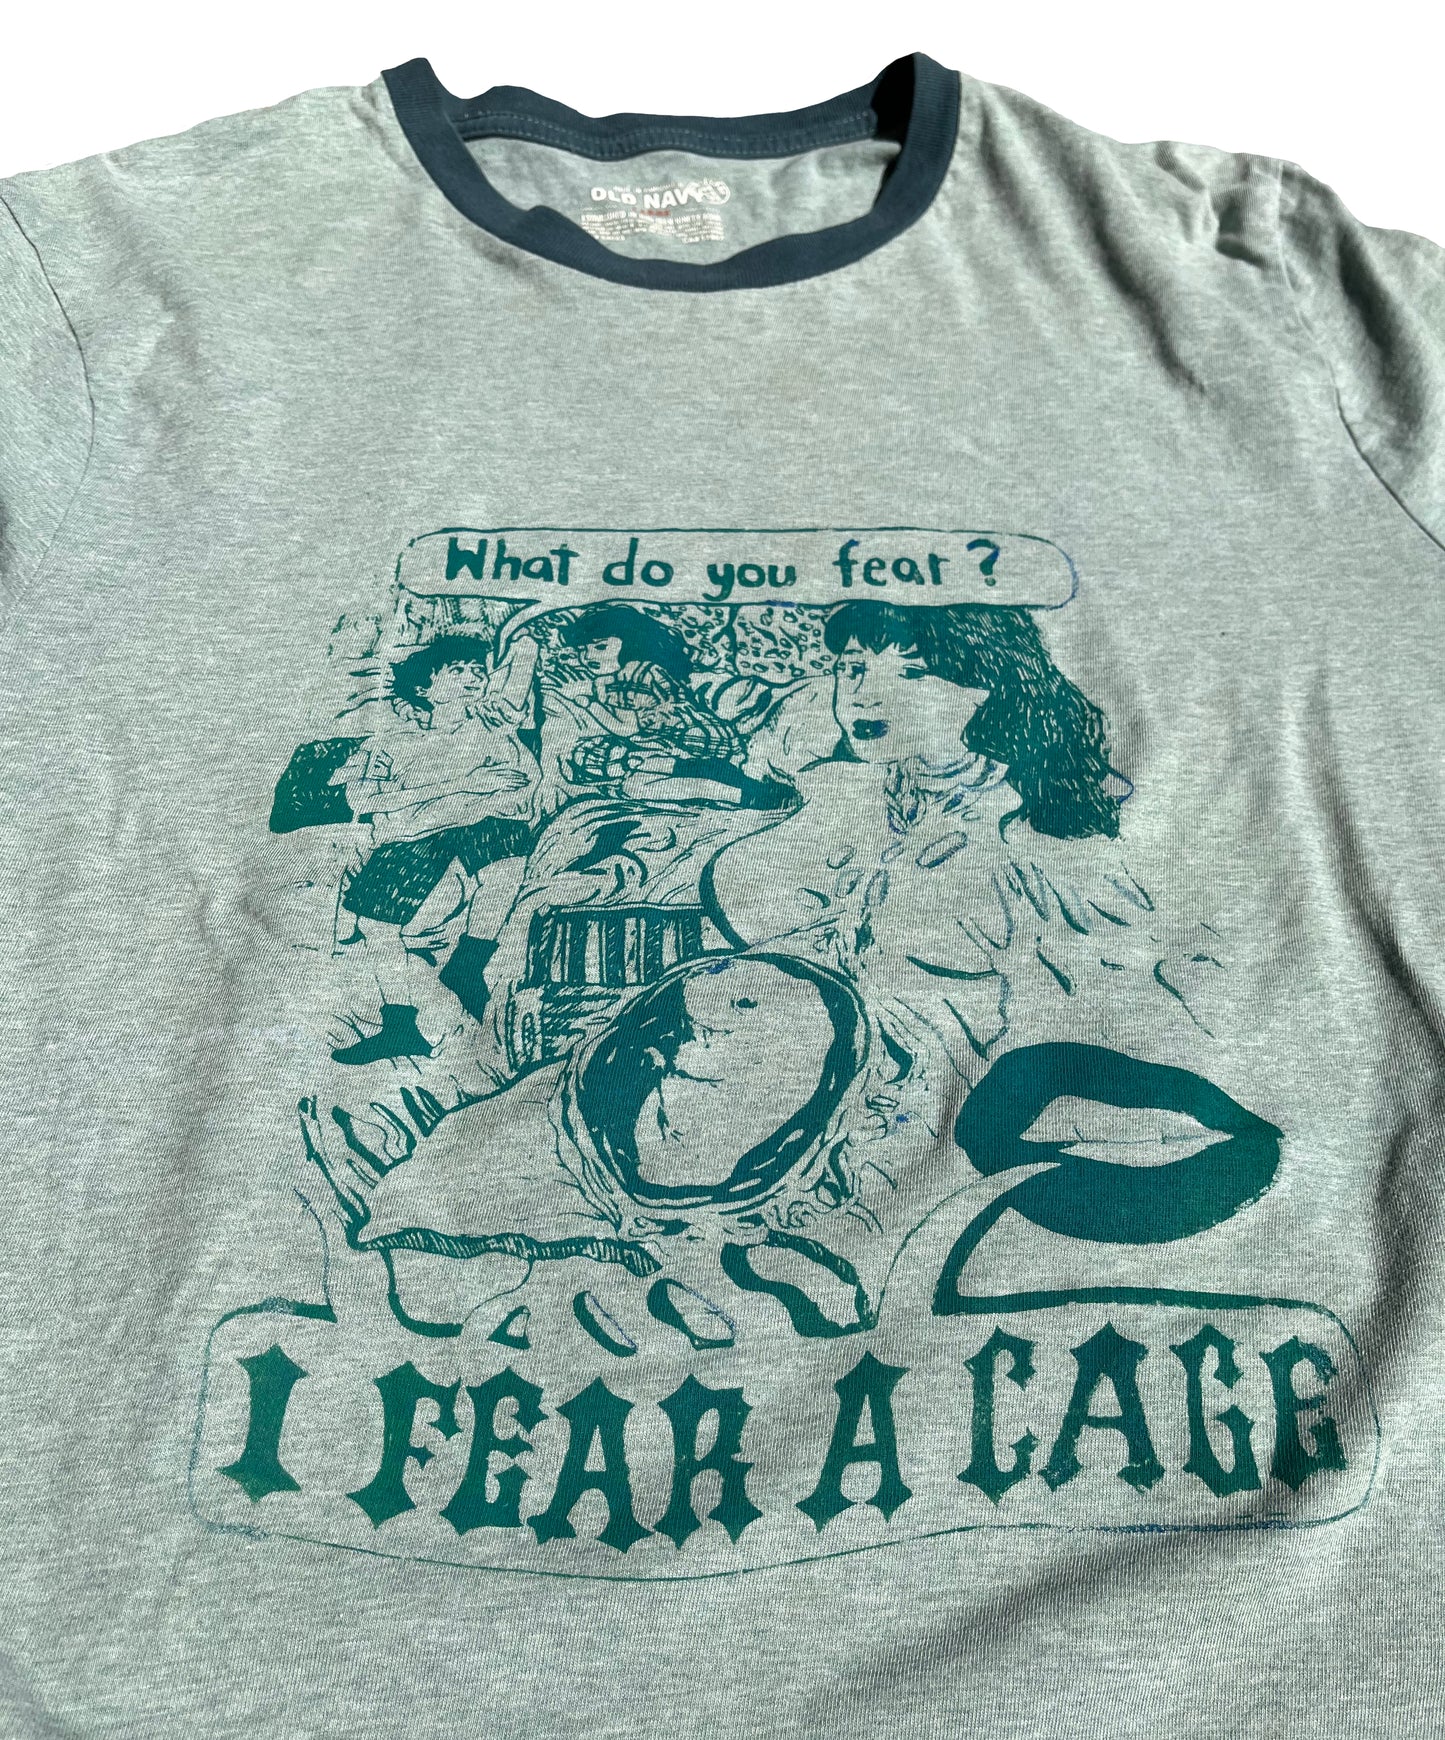 Large I Fear A Cage 02 Graphic Tee Shirt